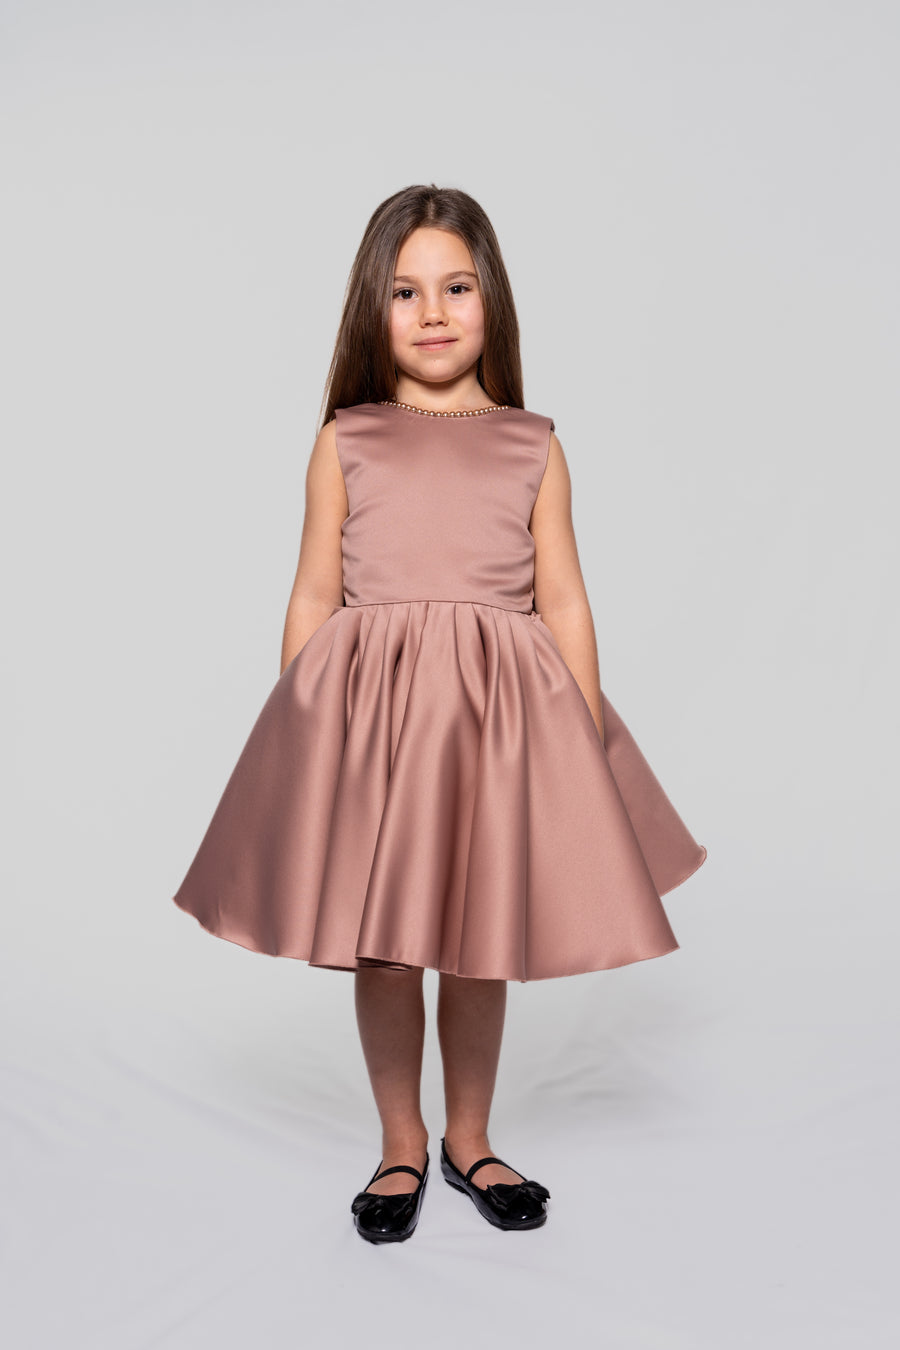 Ash rose satin dress embellished with pearls and a ribbon